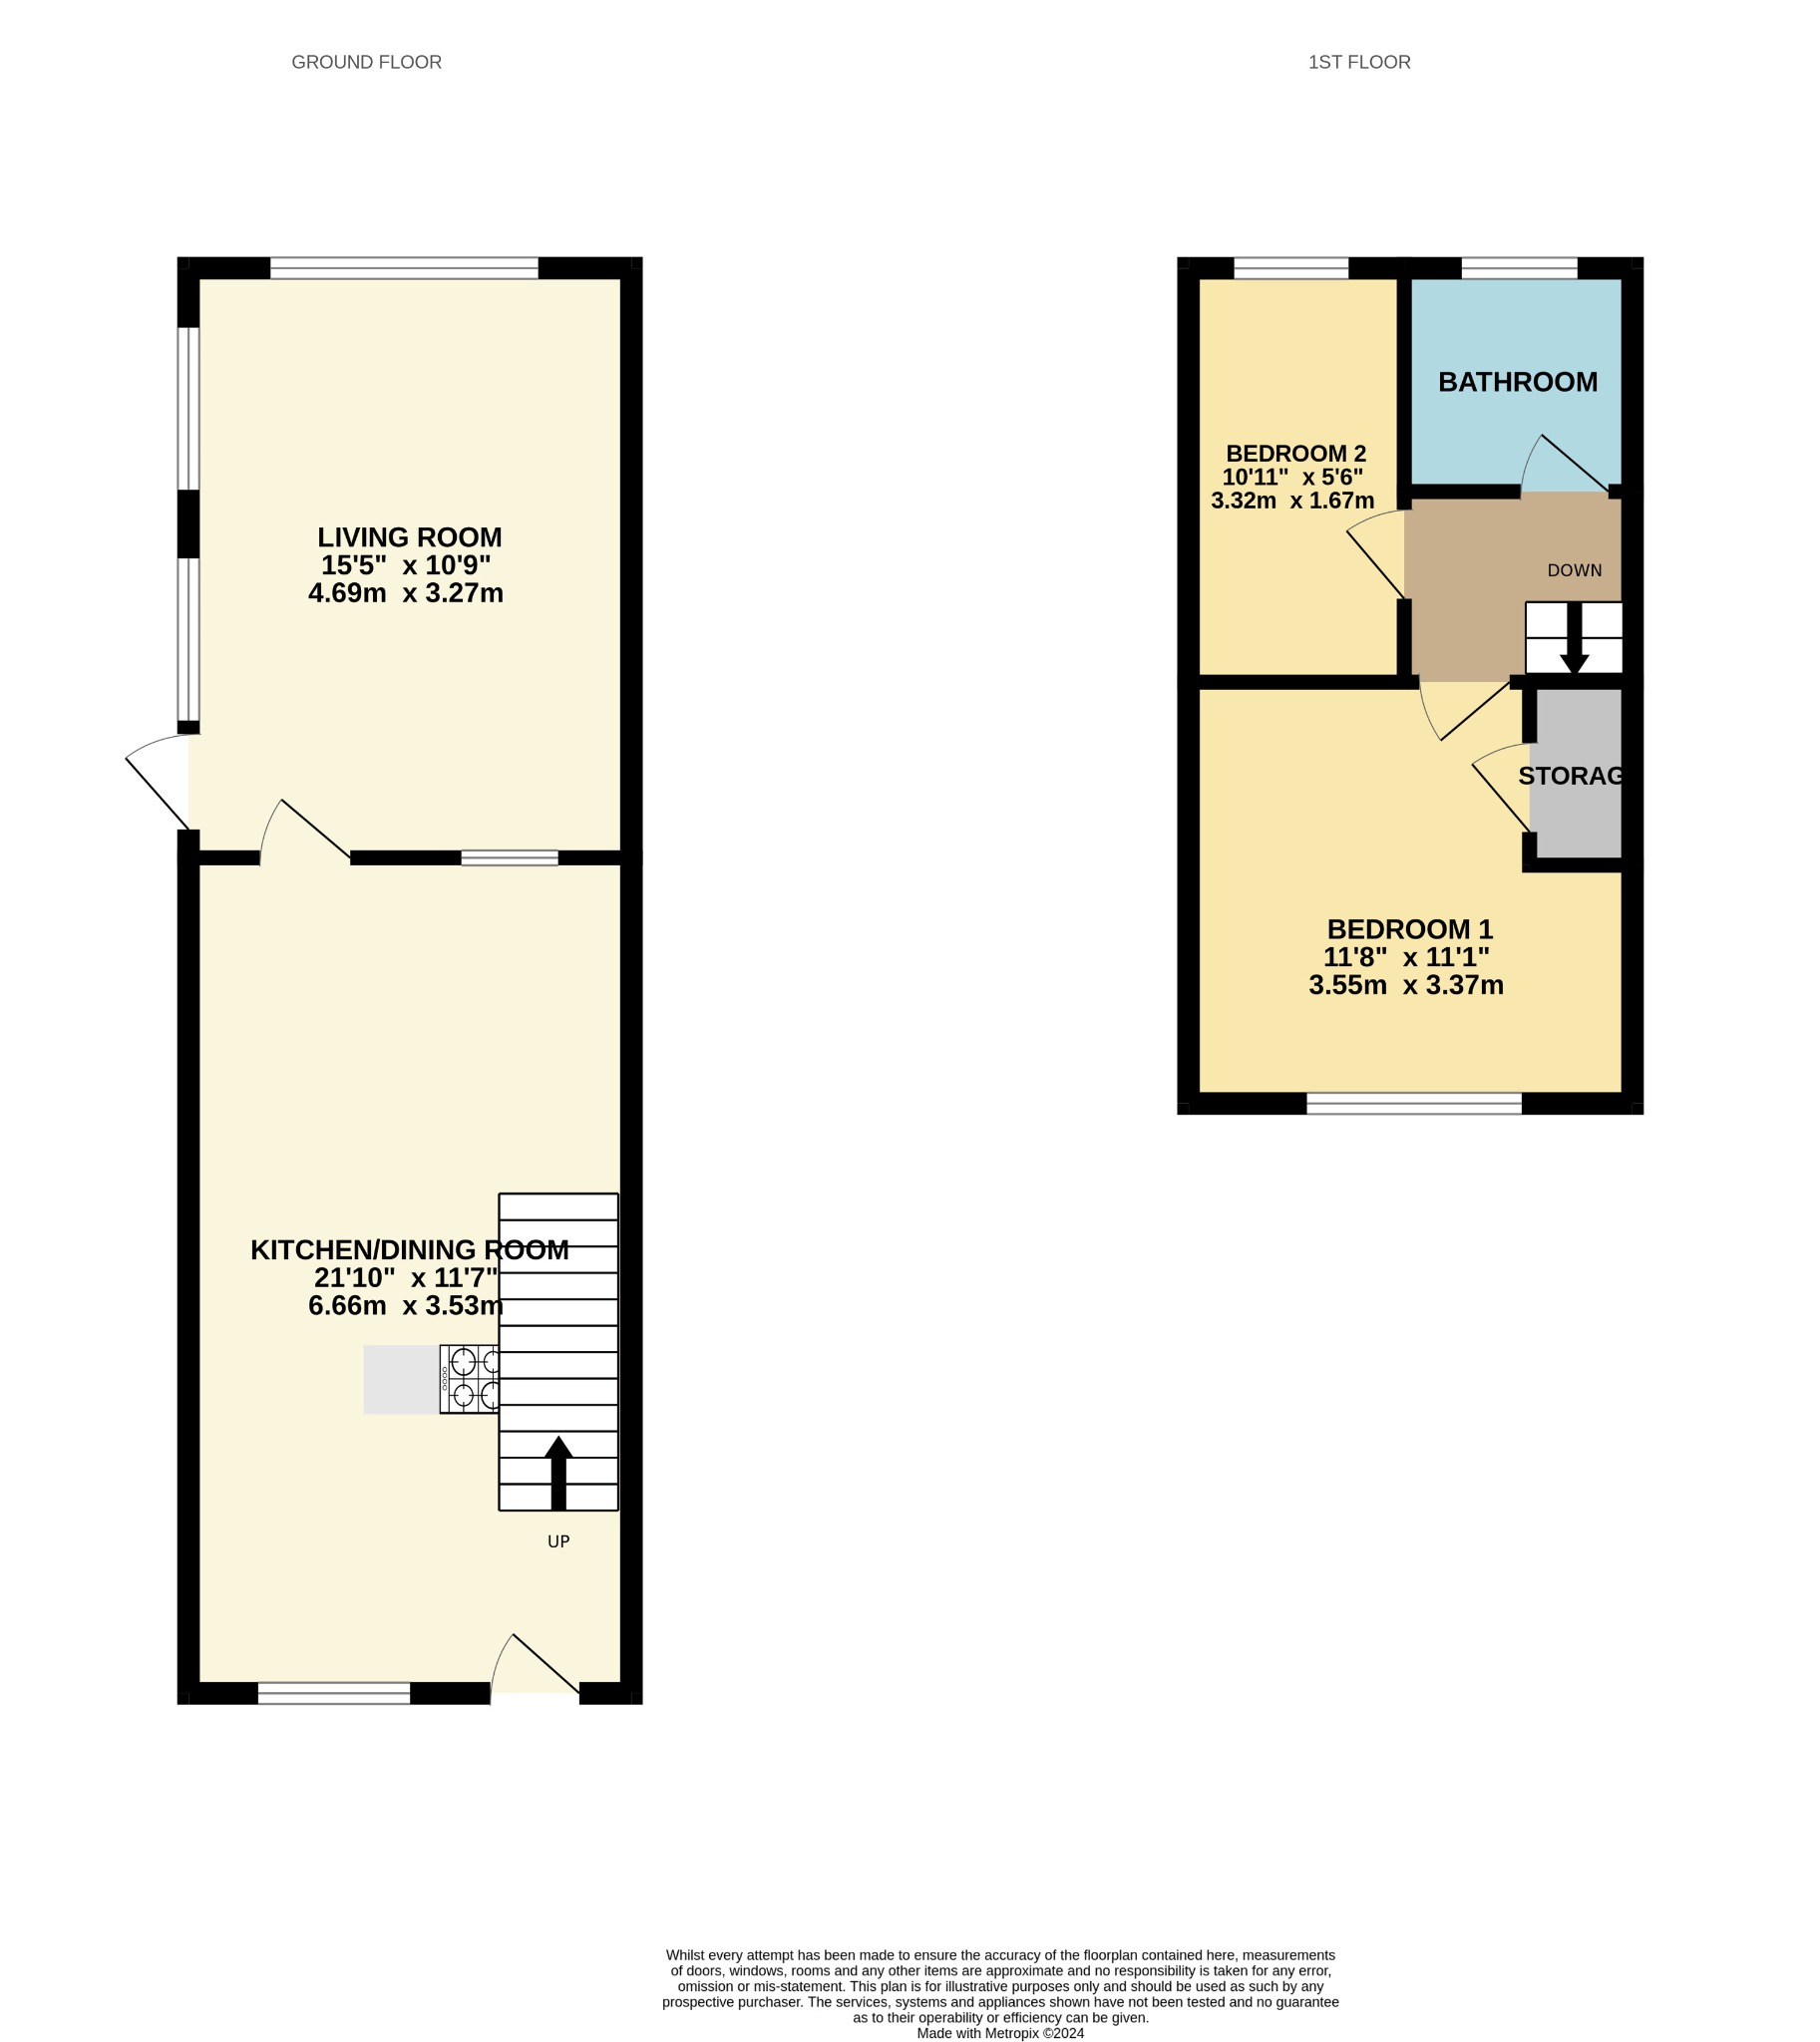 2 bed end of terrace house for sale - Property floorplan